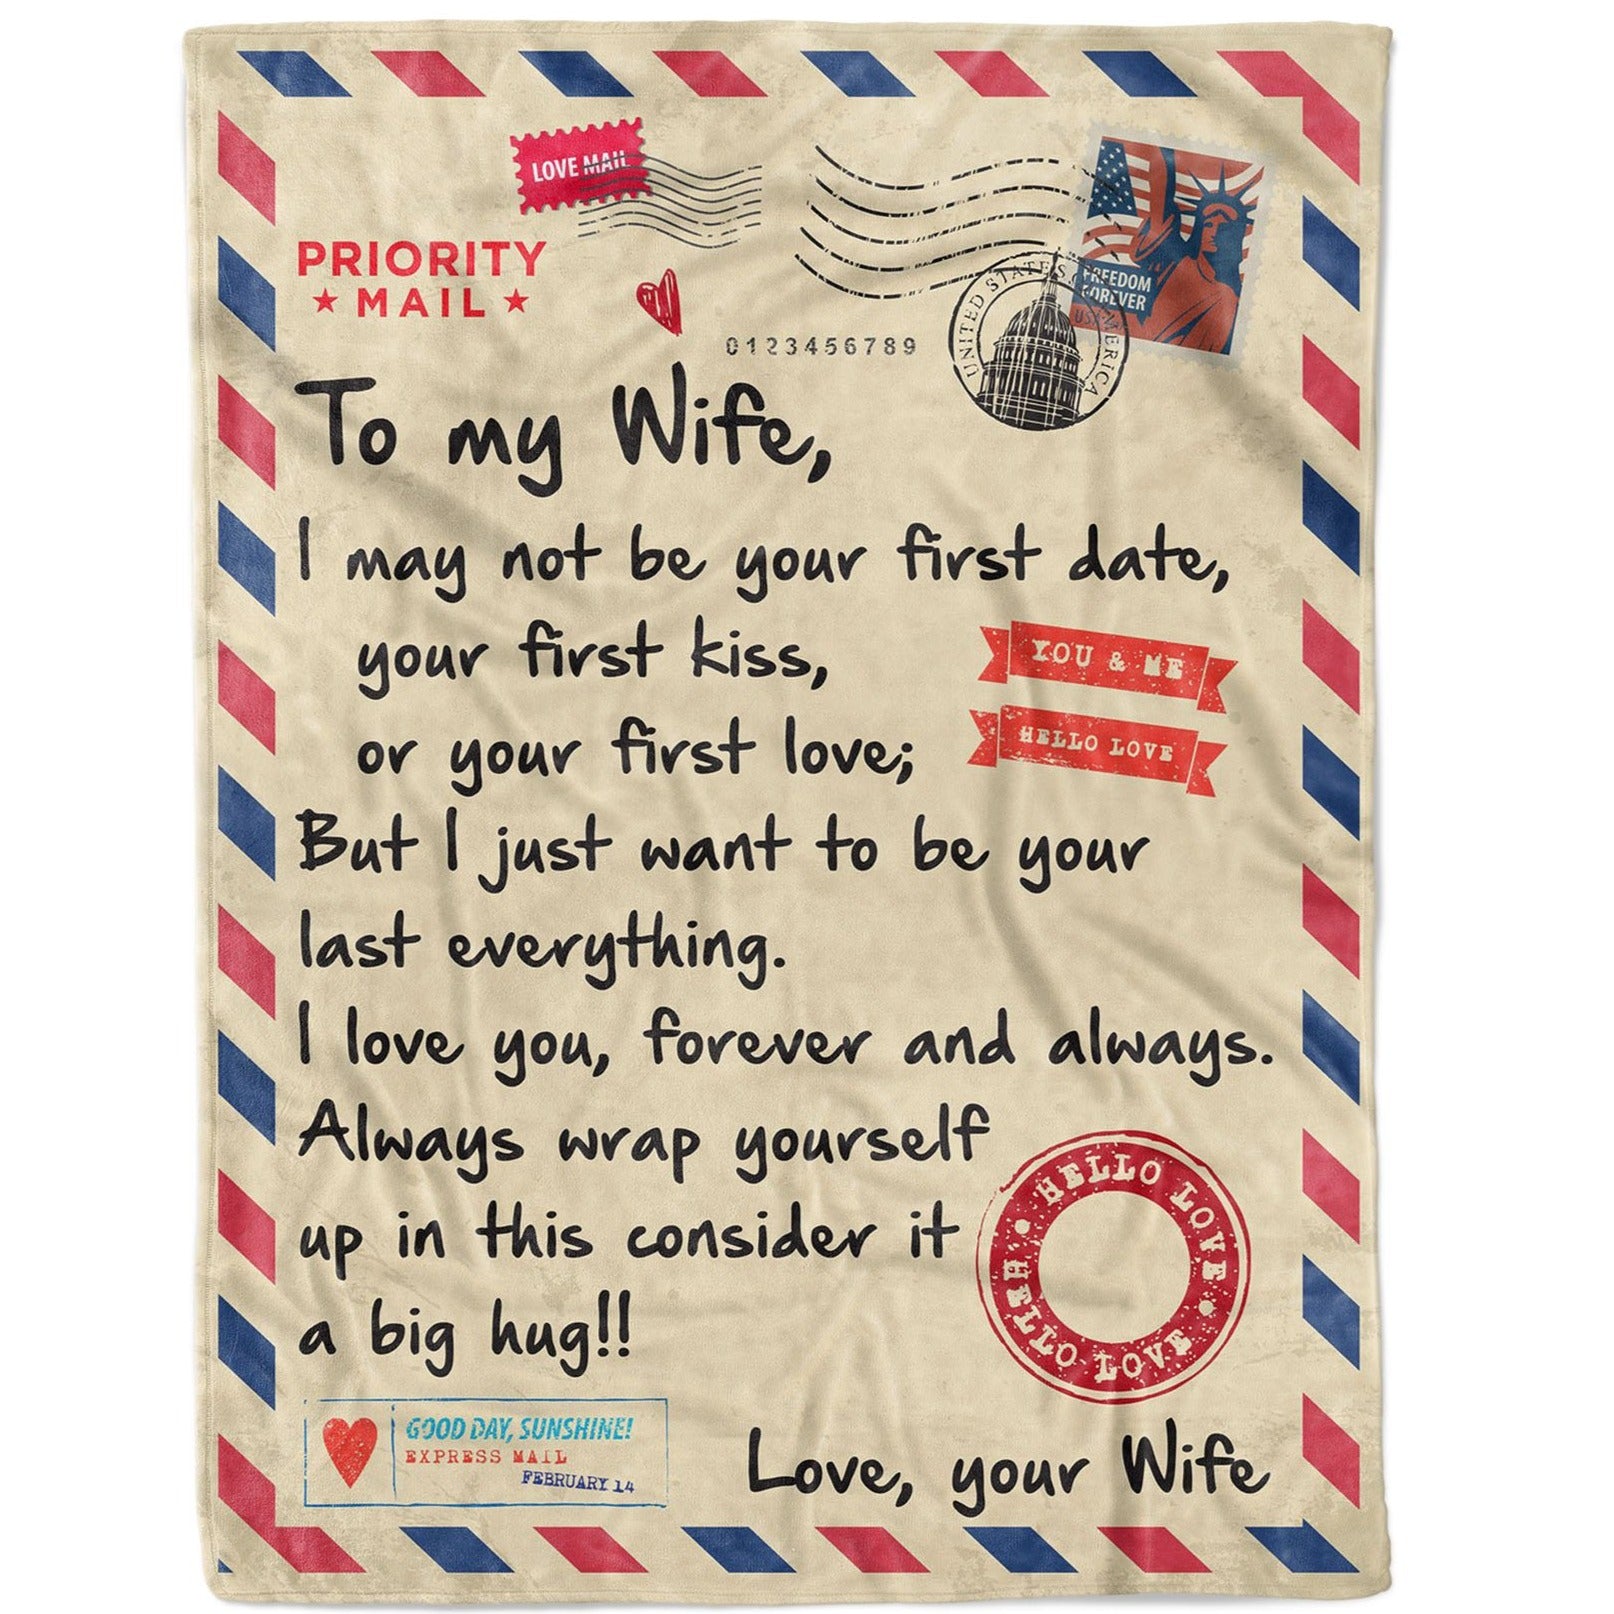 Gifts for Wife - Wife Gifts from Husband - I Love You Gifts for Her for  Anniversary, Birthday Gifts for Wife, Wife Christmas Gift Ideas - Wife  Airmail